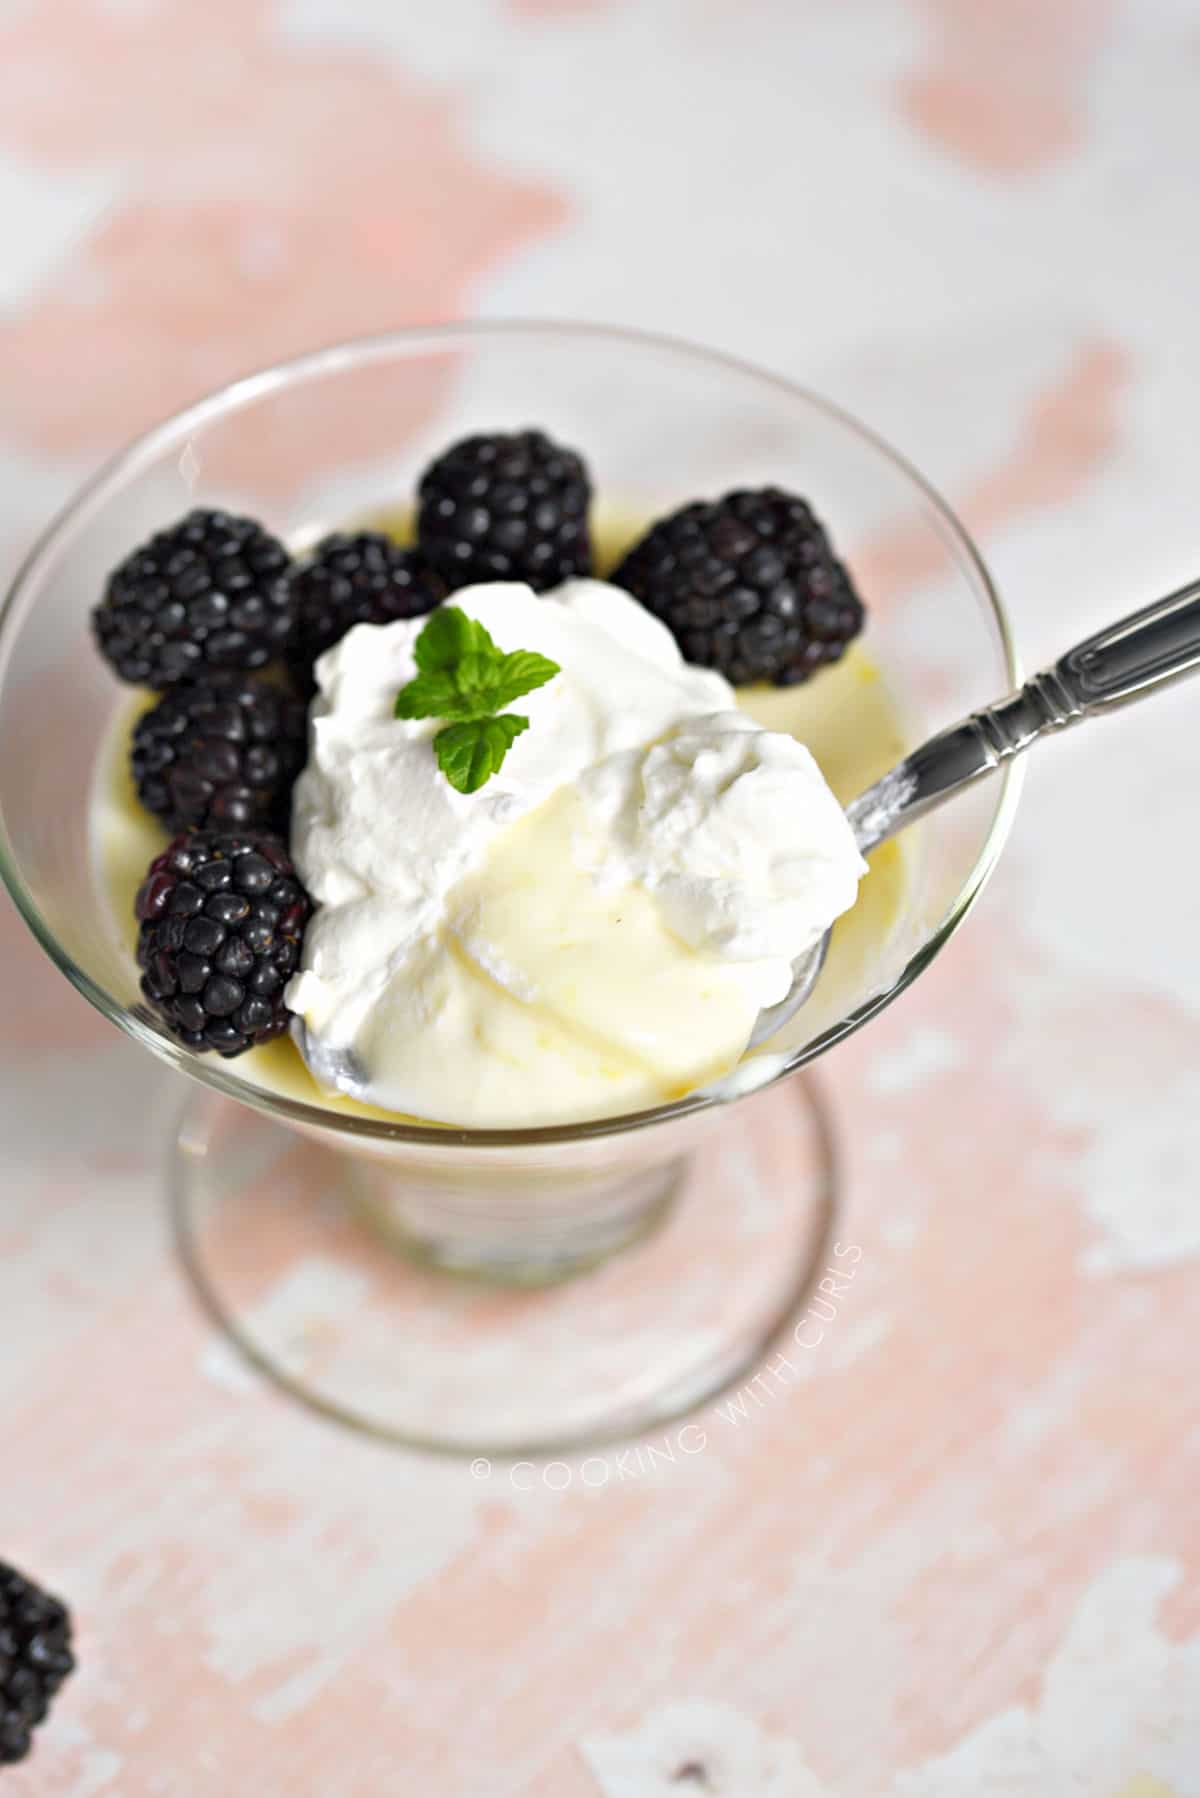 A spoon pulling up a scoop of lemon posset topped with whipped cream, with fresh blackberries around the left side of the dessert glass.